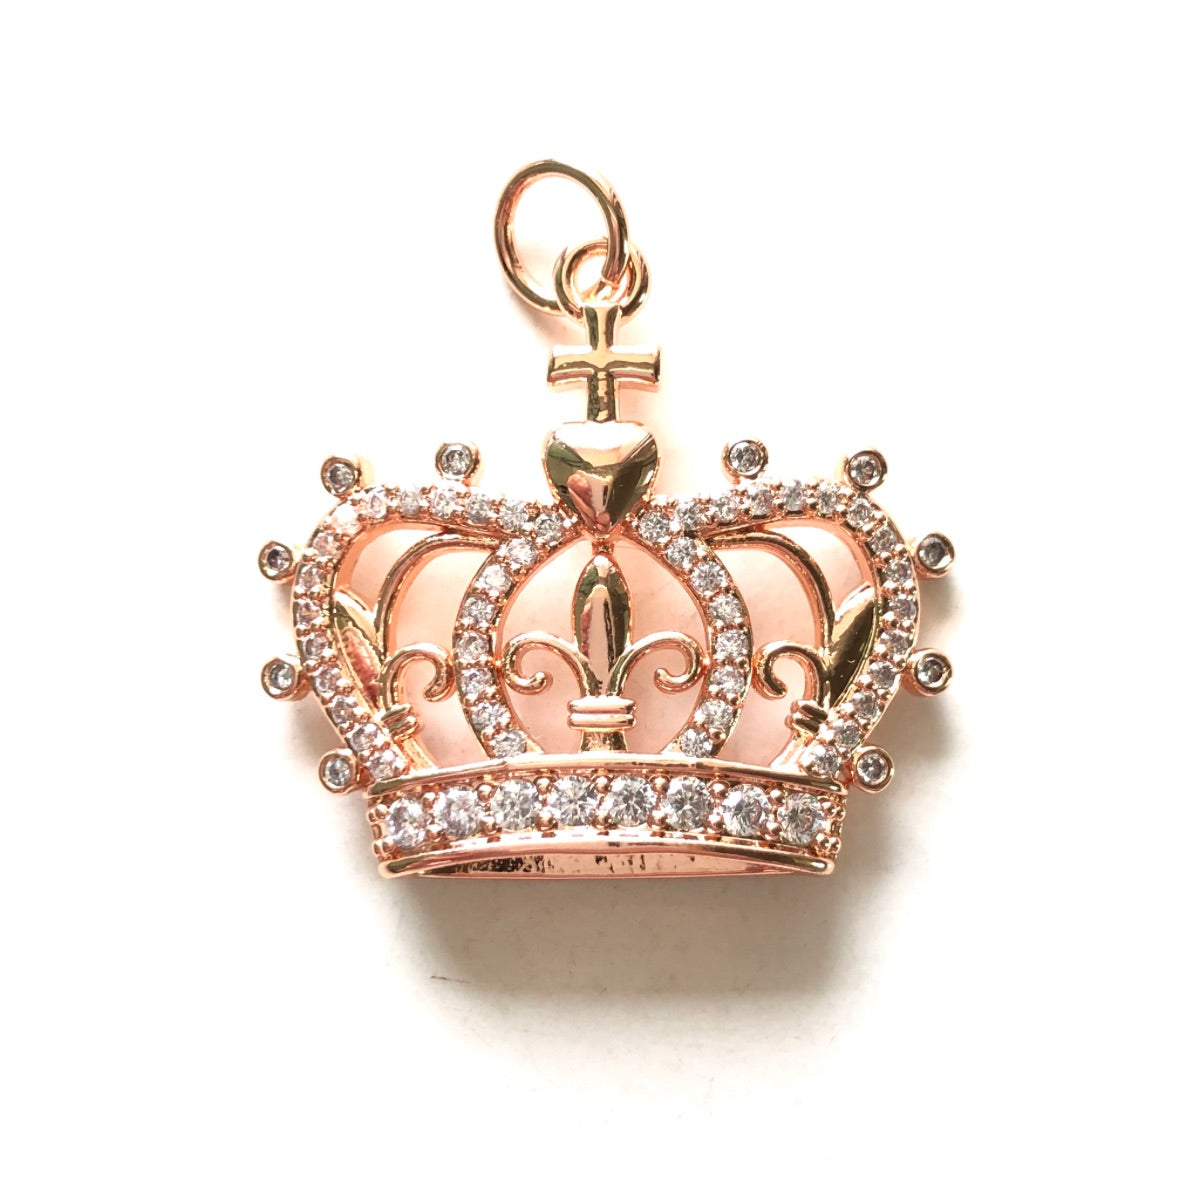 10pcs/lot CZ Paved Crown Charms CZ Paved Charms Crowns New Charms Arrivals Charms Beads Beyond